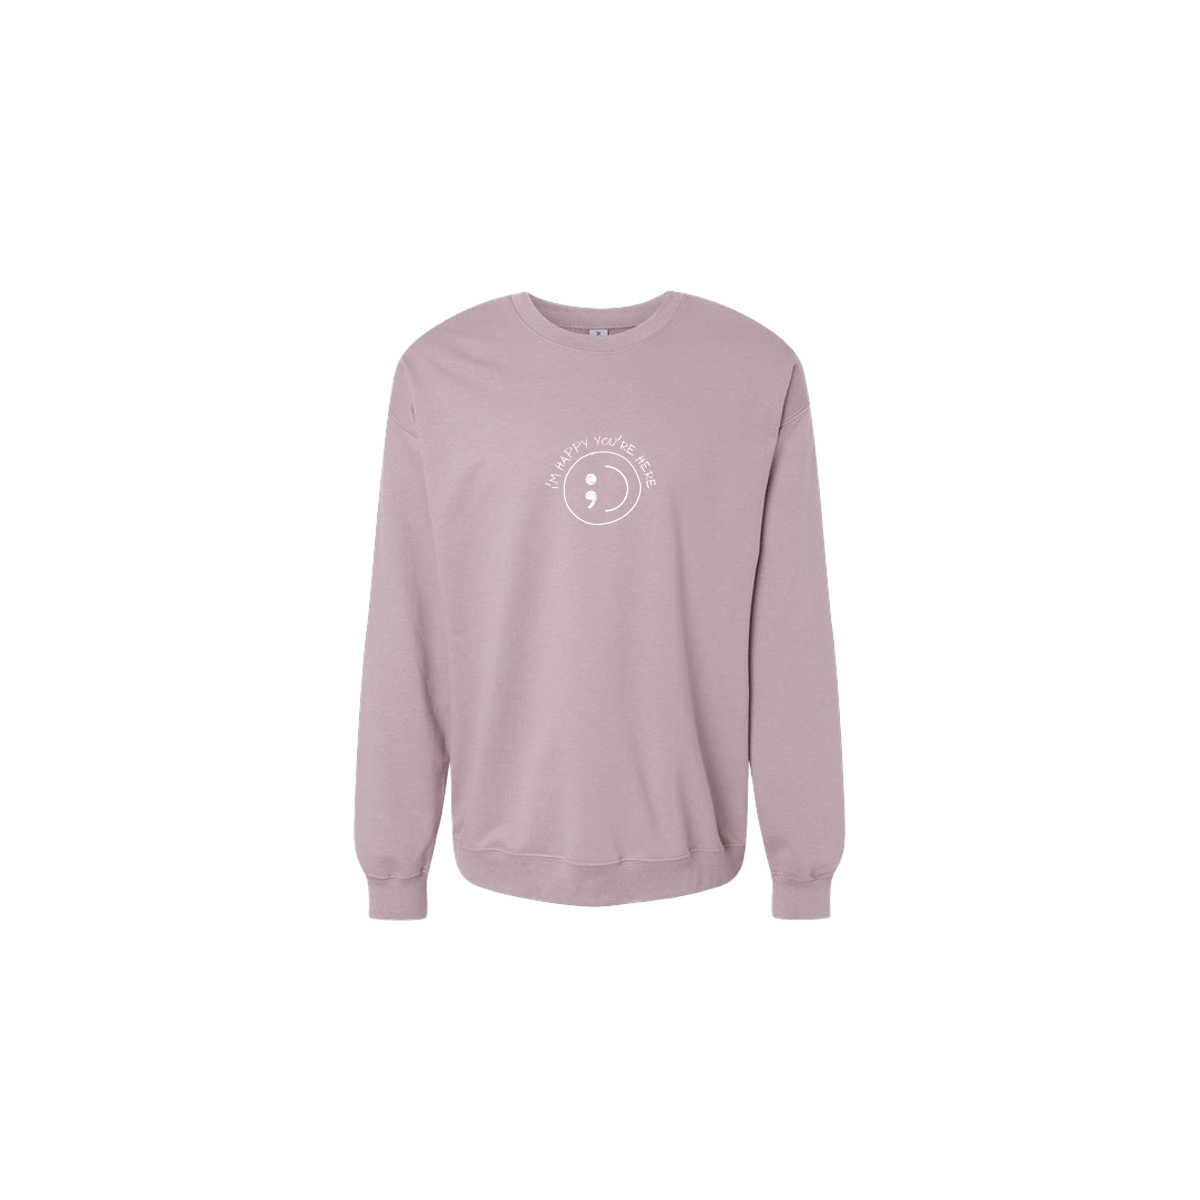 I'm Happy You're Here Embroidered Mauve Crewneck - Mental Health Awareness Clothing